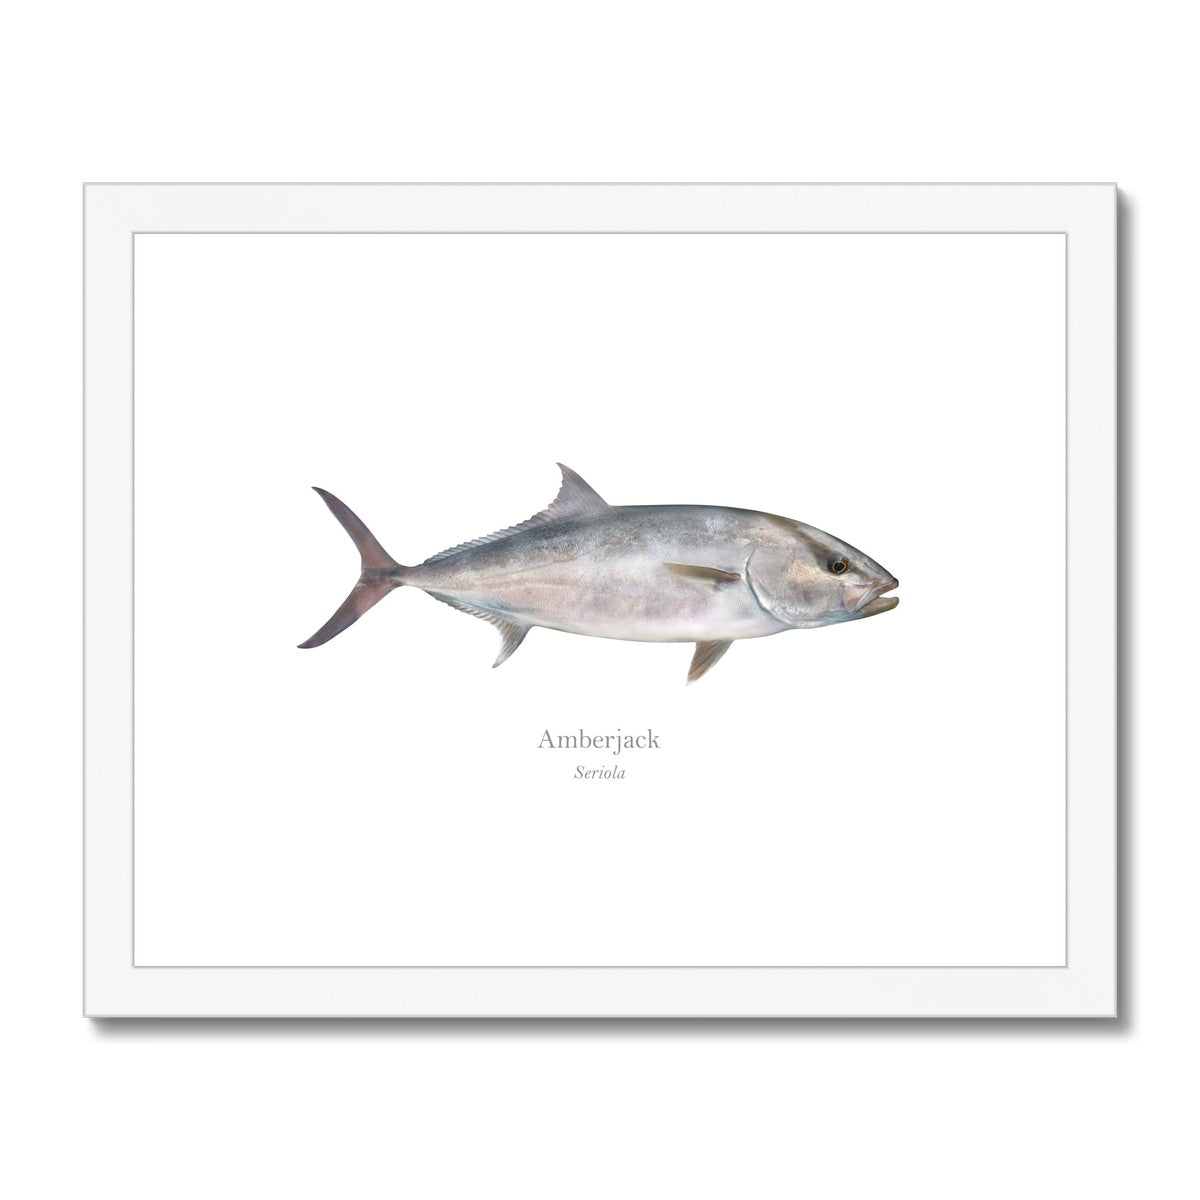 Amberjack - Framed & Mounted Print - With Scientific Name